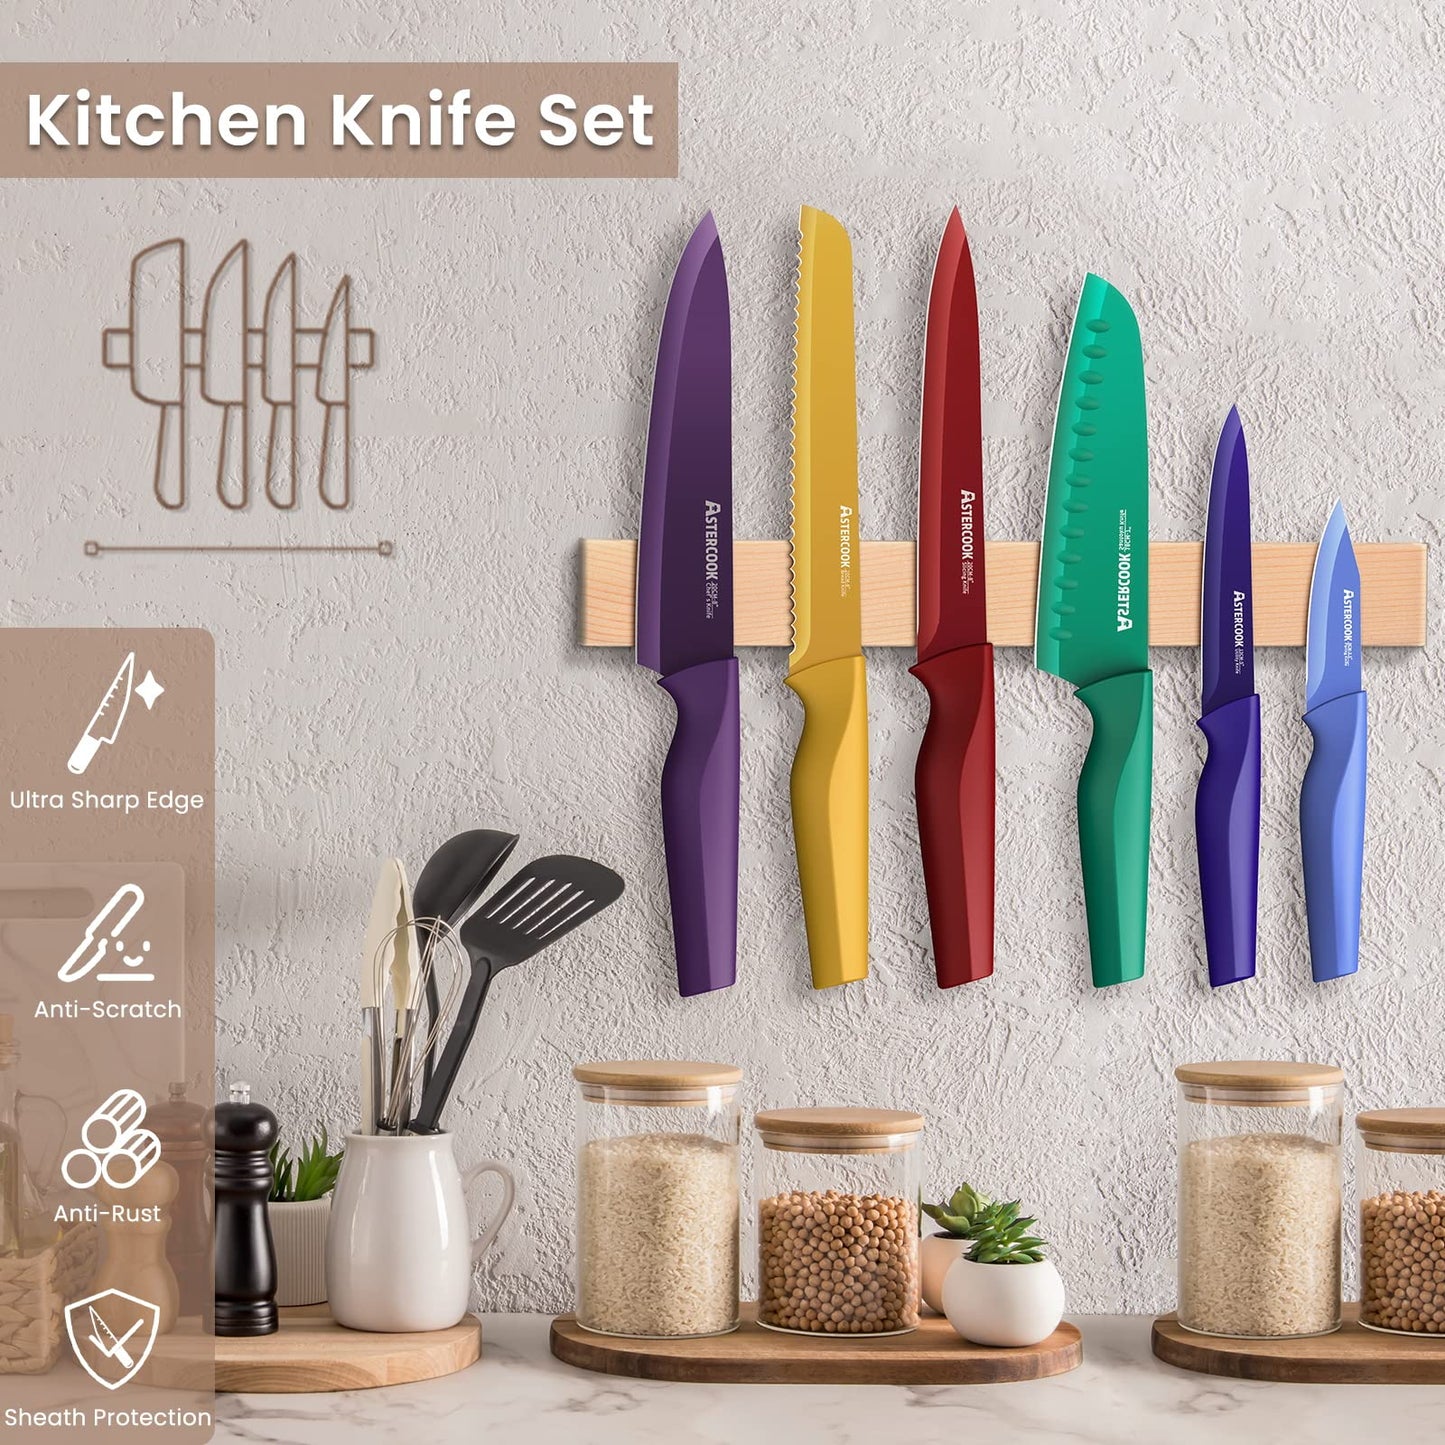 Astercook Knife Set, 12 Pcs Color-Coded Kitchen Knife Set, 6 Color Anti-Rust Coating Stainless Steel Kitchen Knives with 6 Blade Guards, Dishwasher Safe